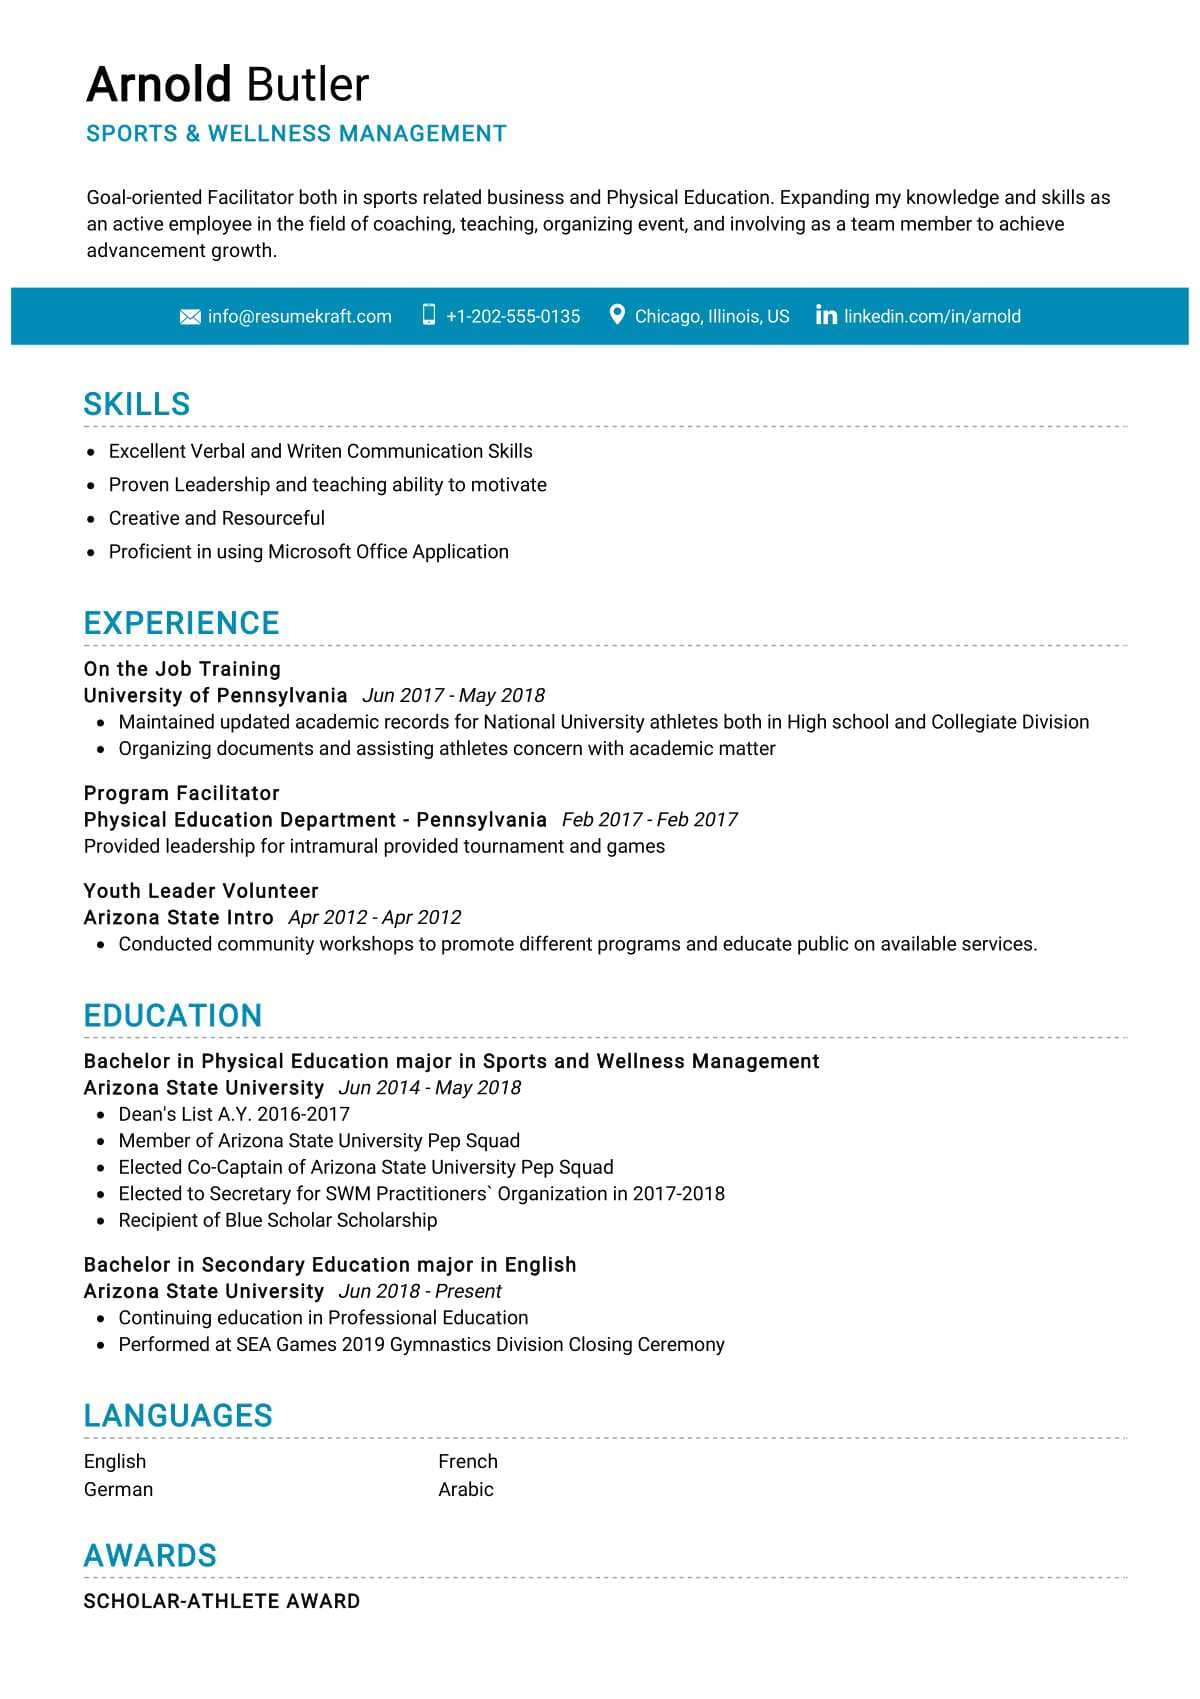 Sample Resume for Professional Sports Player Turned Business Executive Sports Wellness Management Resume Sample 2022 Writing Tips …